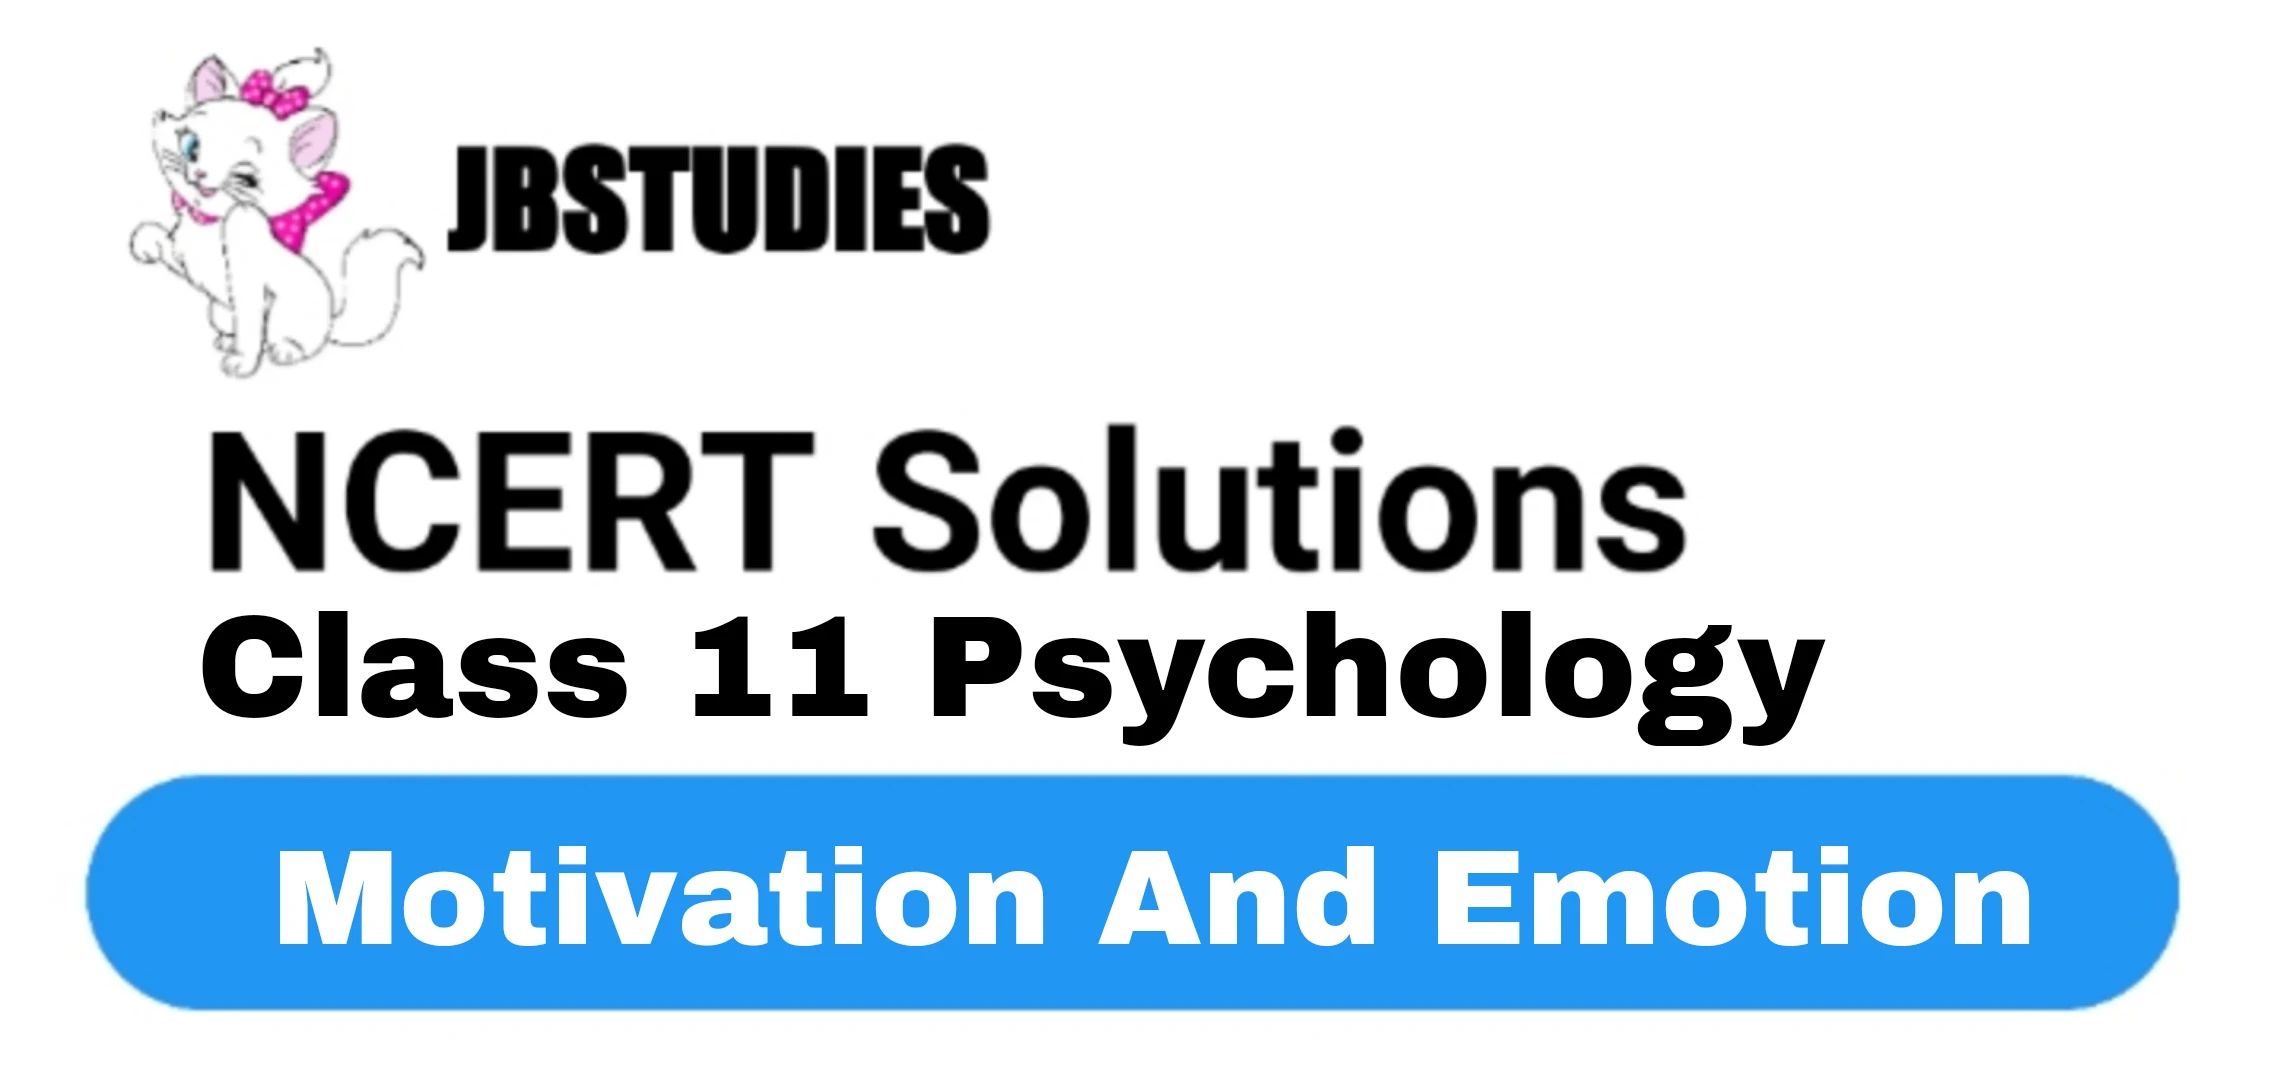 Solutions Class 11 Psychology Chapter -9 (Motivation And Emotion)